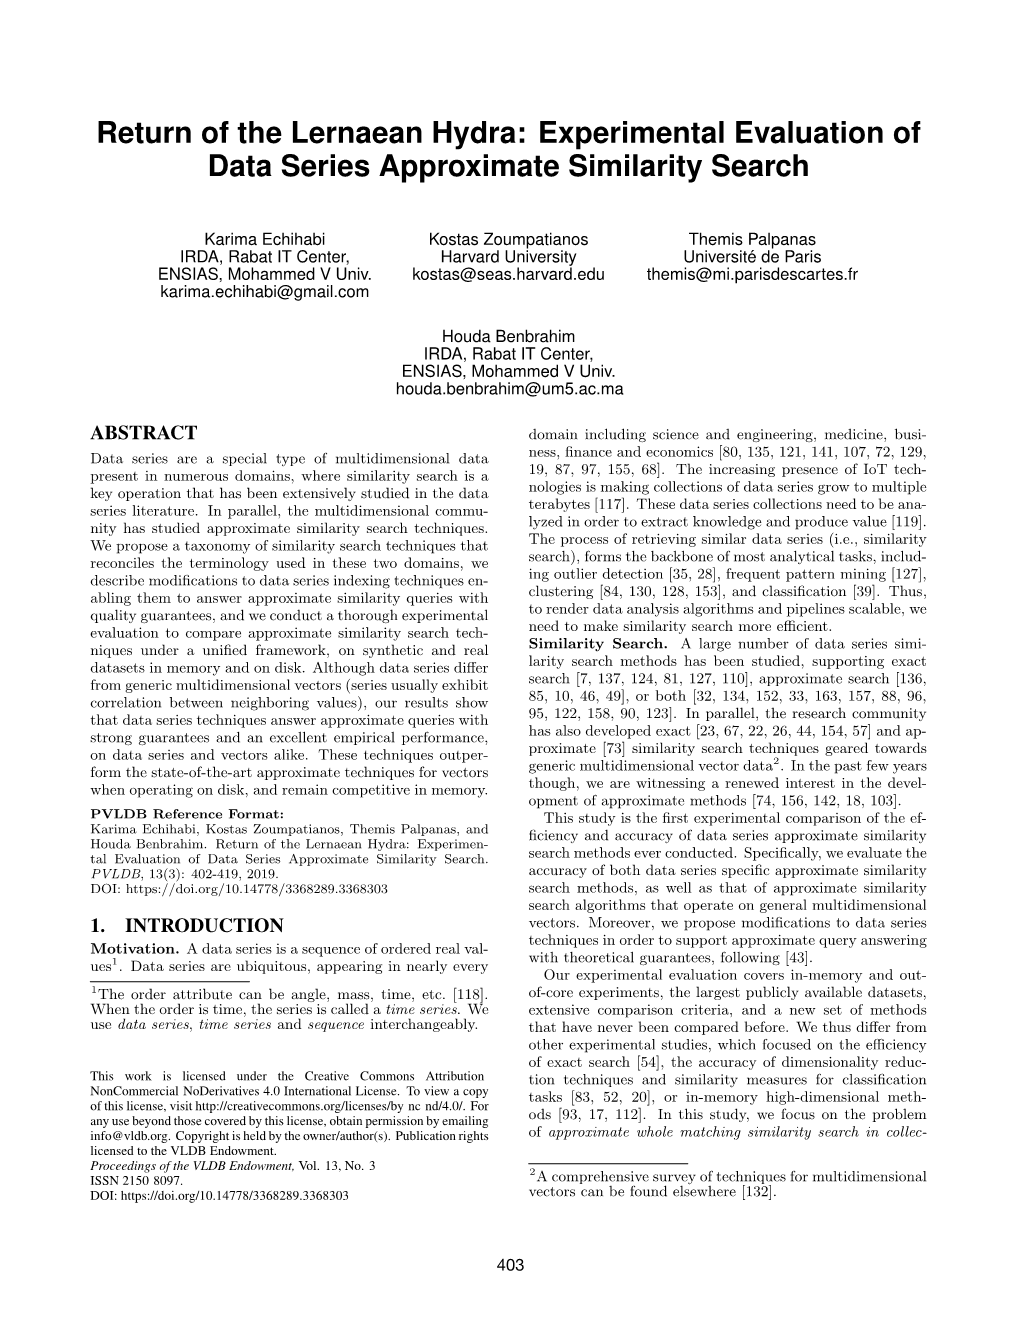 Experimental Evaluation of Data Series Approximate Similarity Search